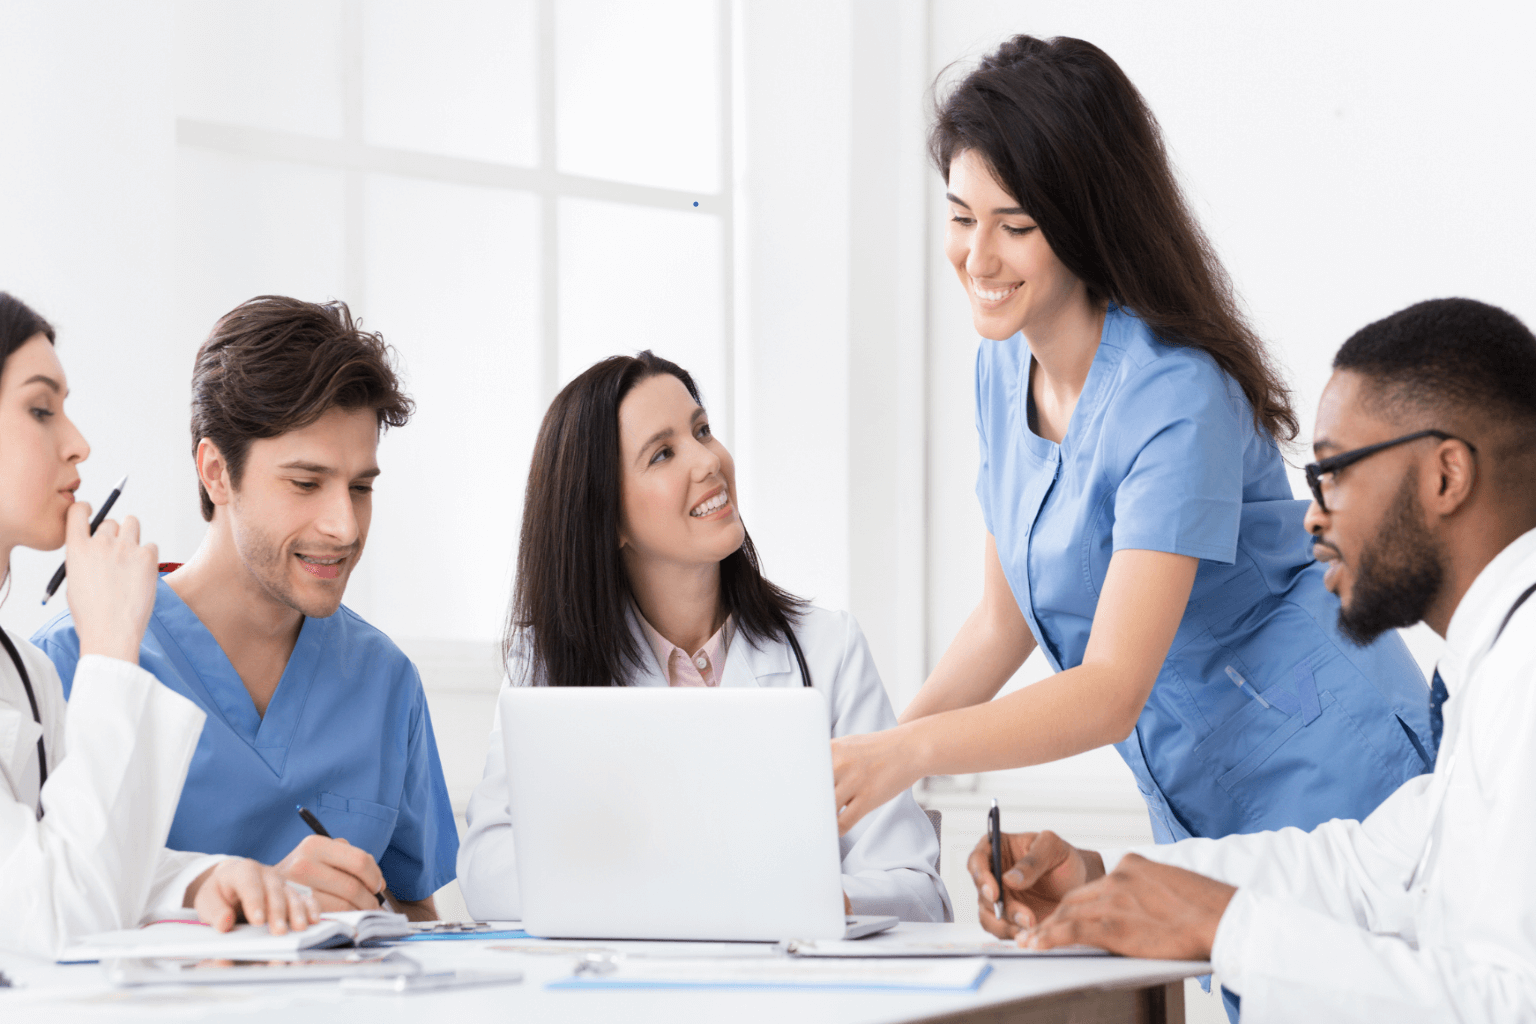 Practitioners-discussing-medical-reports-on-laptop